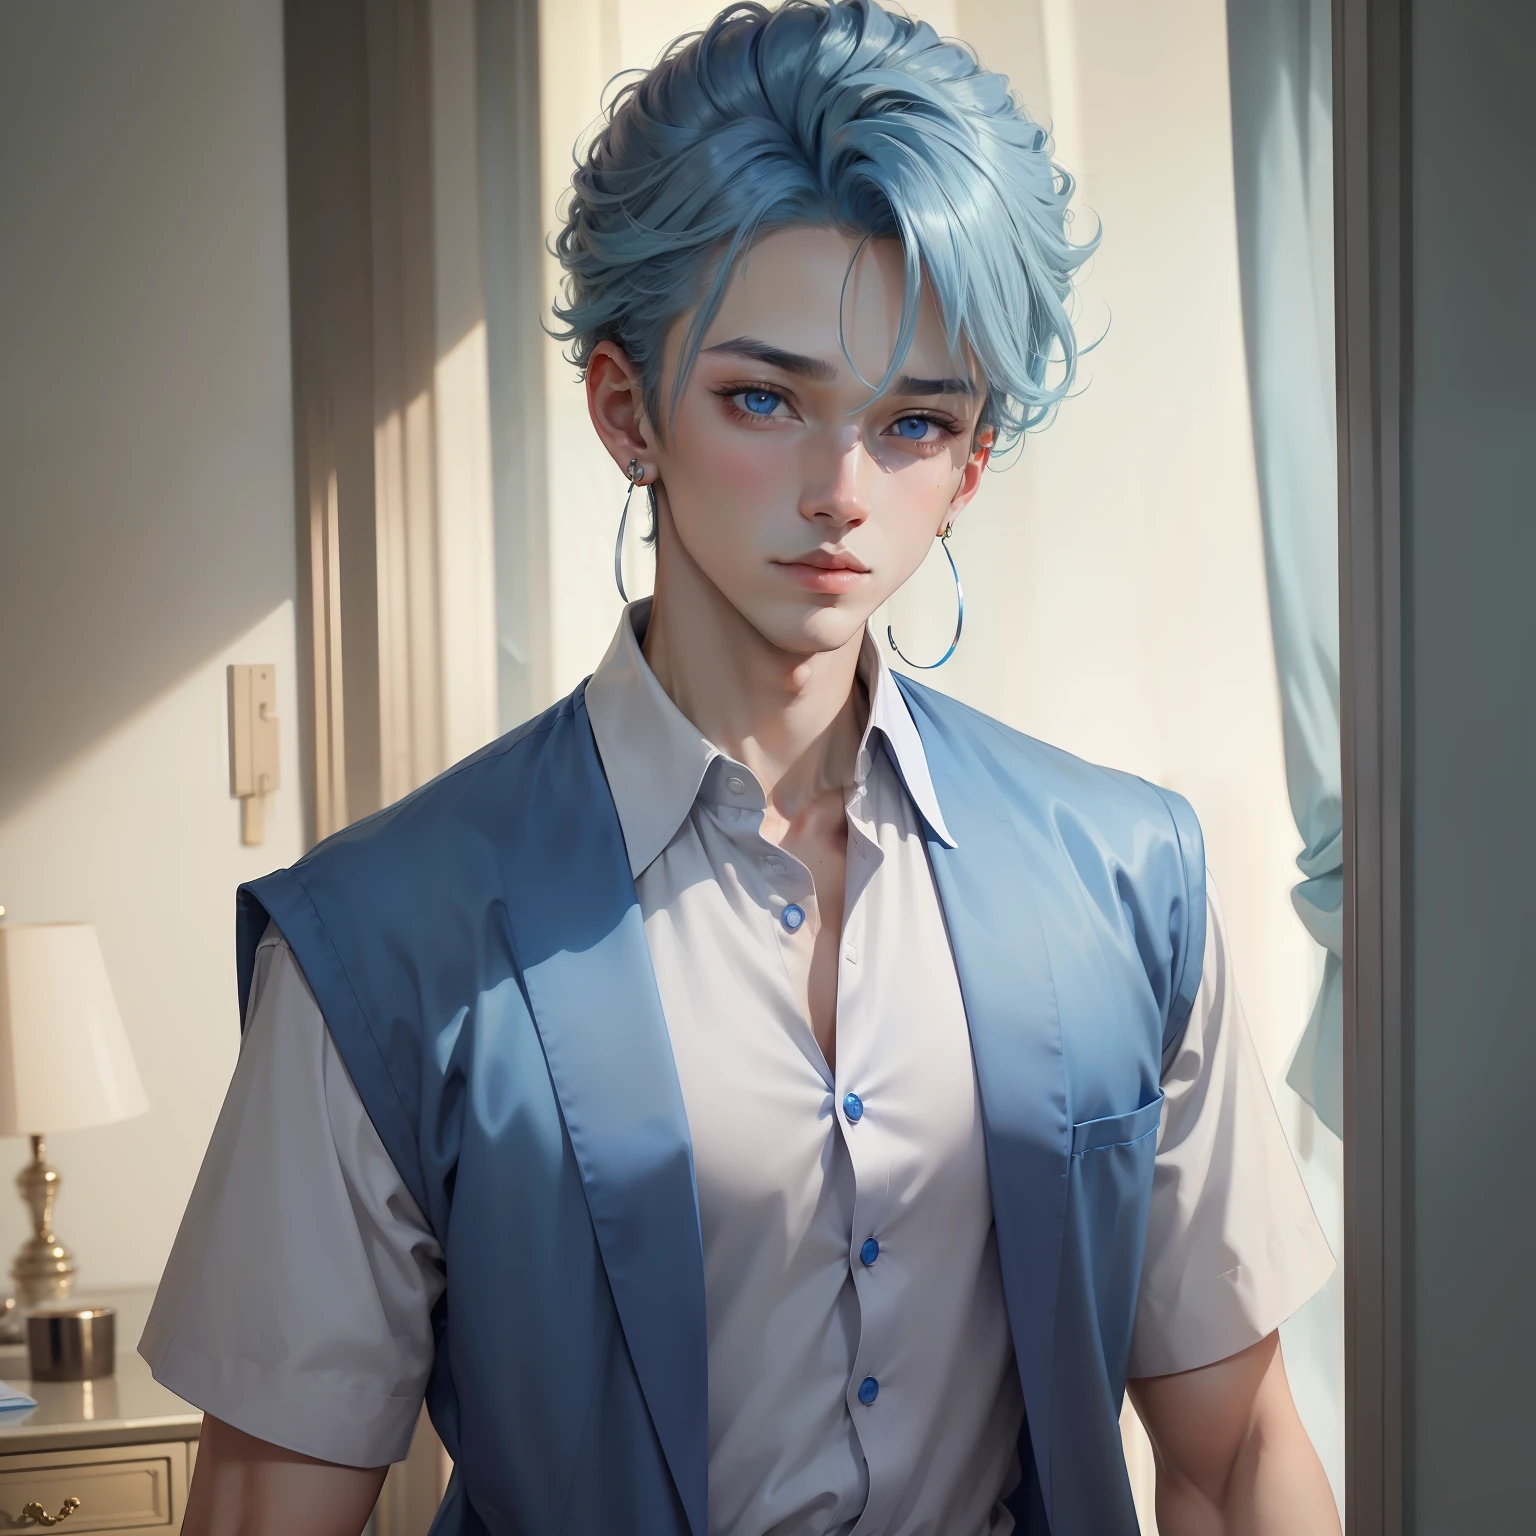 ((Masterpiece)), (Best quality), Ultra-detailed, A high resolution, super-fine, A high resolution, 8K wallpaper, 4K,lightblue hair，(((A boy 1.3)))，Blue earrings，a purple eye，Short sleeve shirt white，Being in the room，Half-body close-up，looks into camera